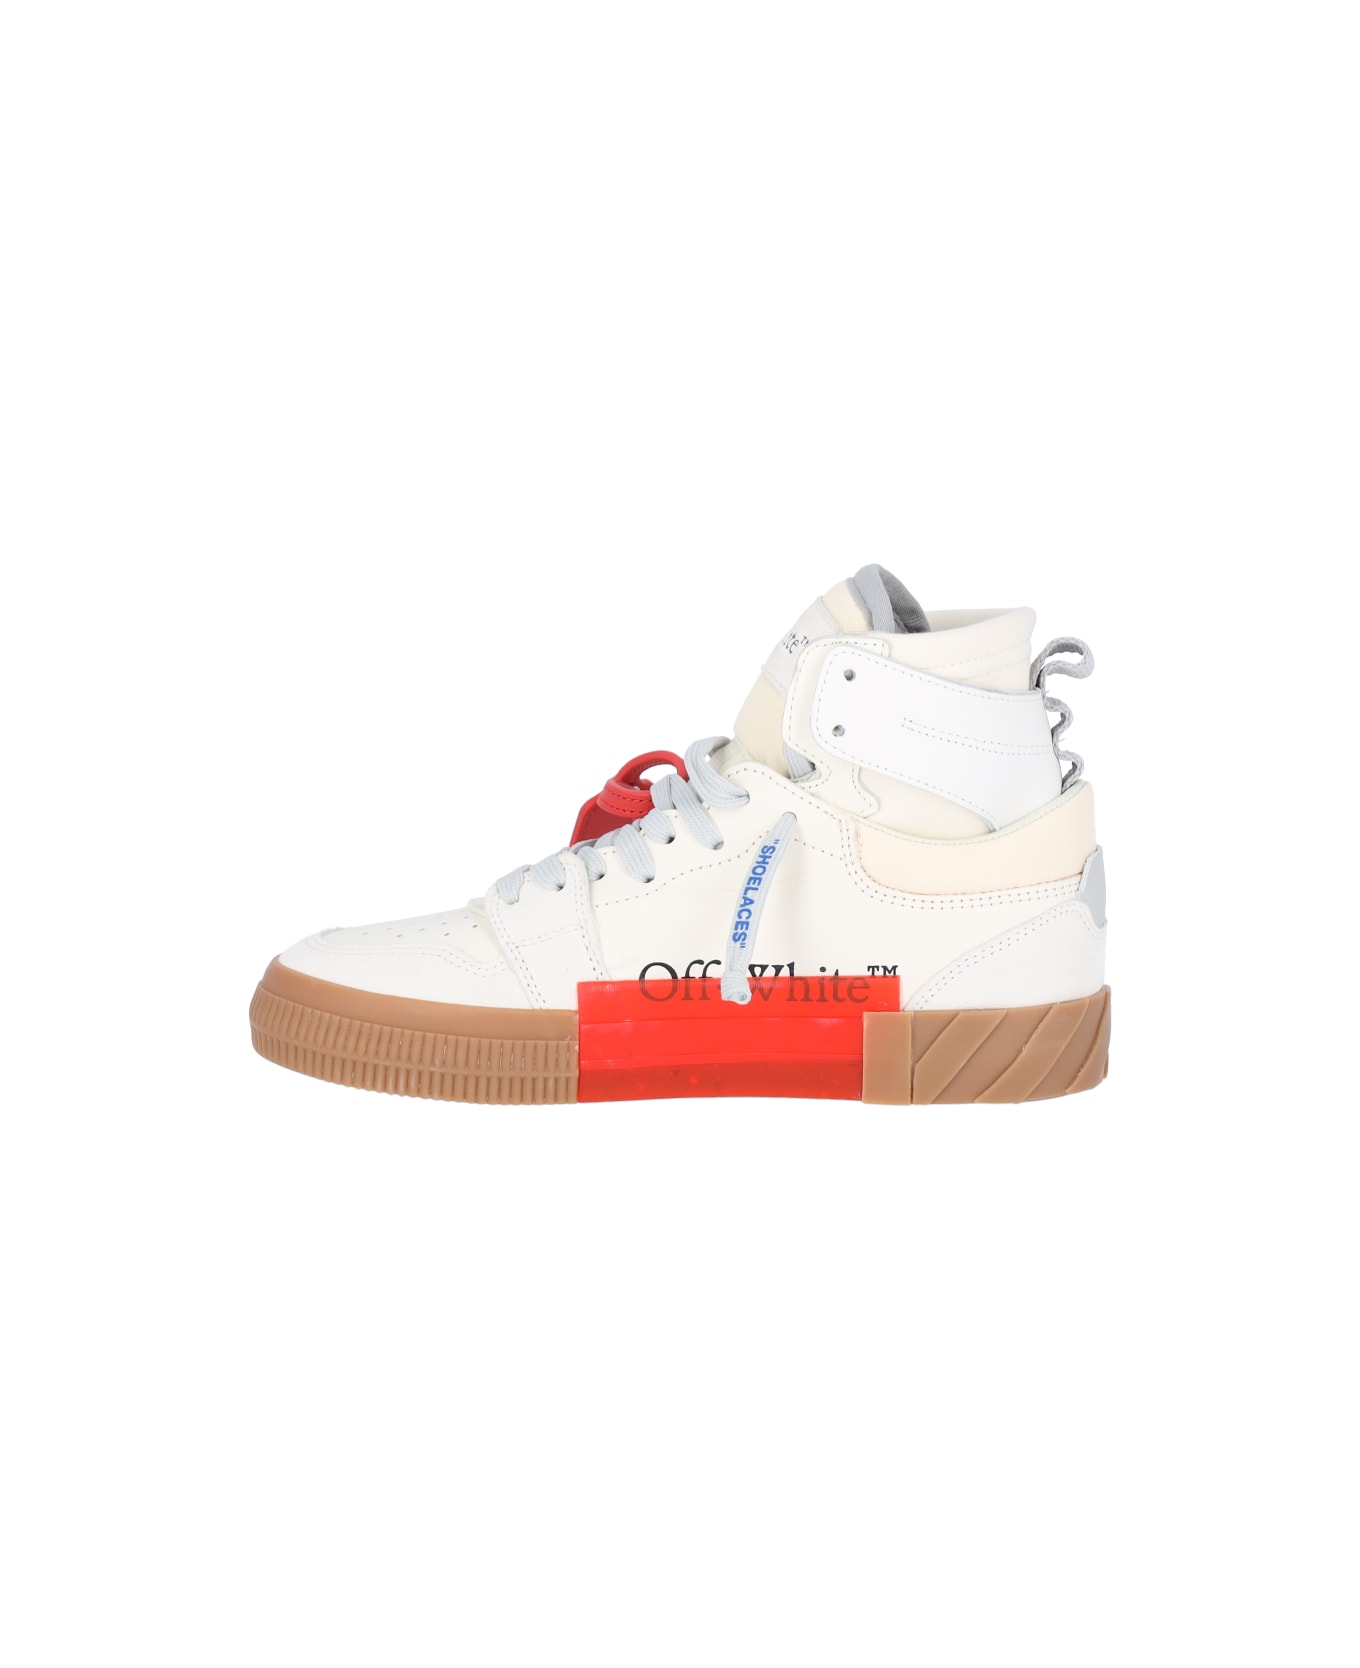 Off-White Floating Arrow High Top Vulcanized Sneakers - Cream